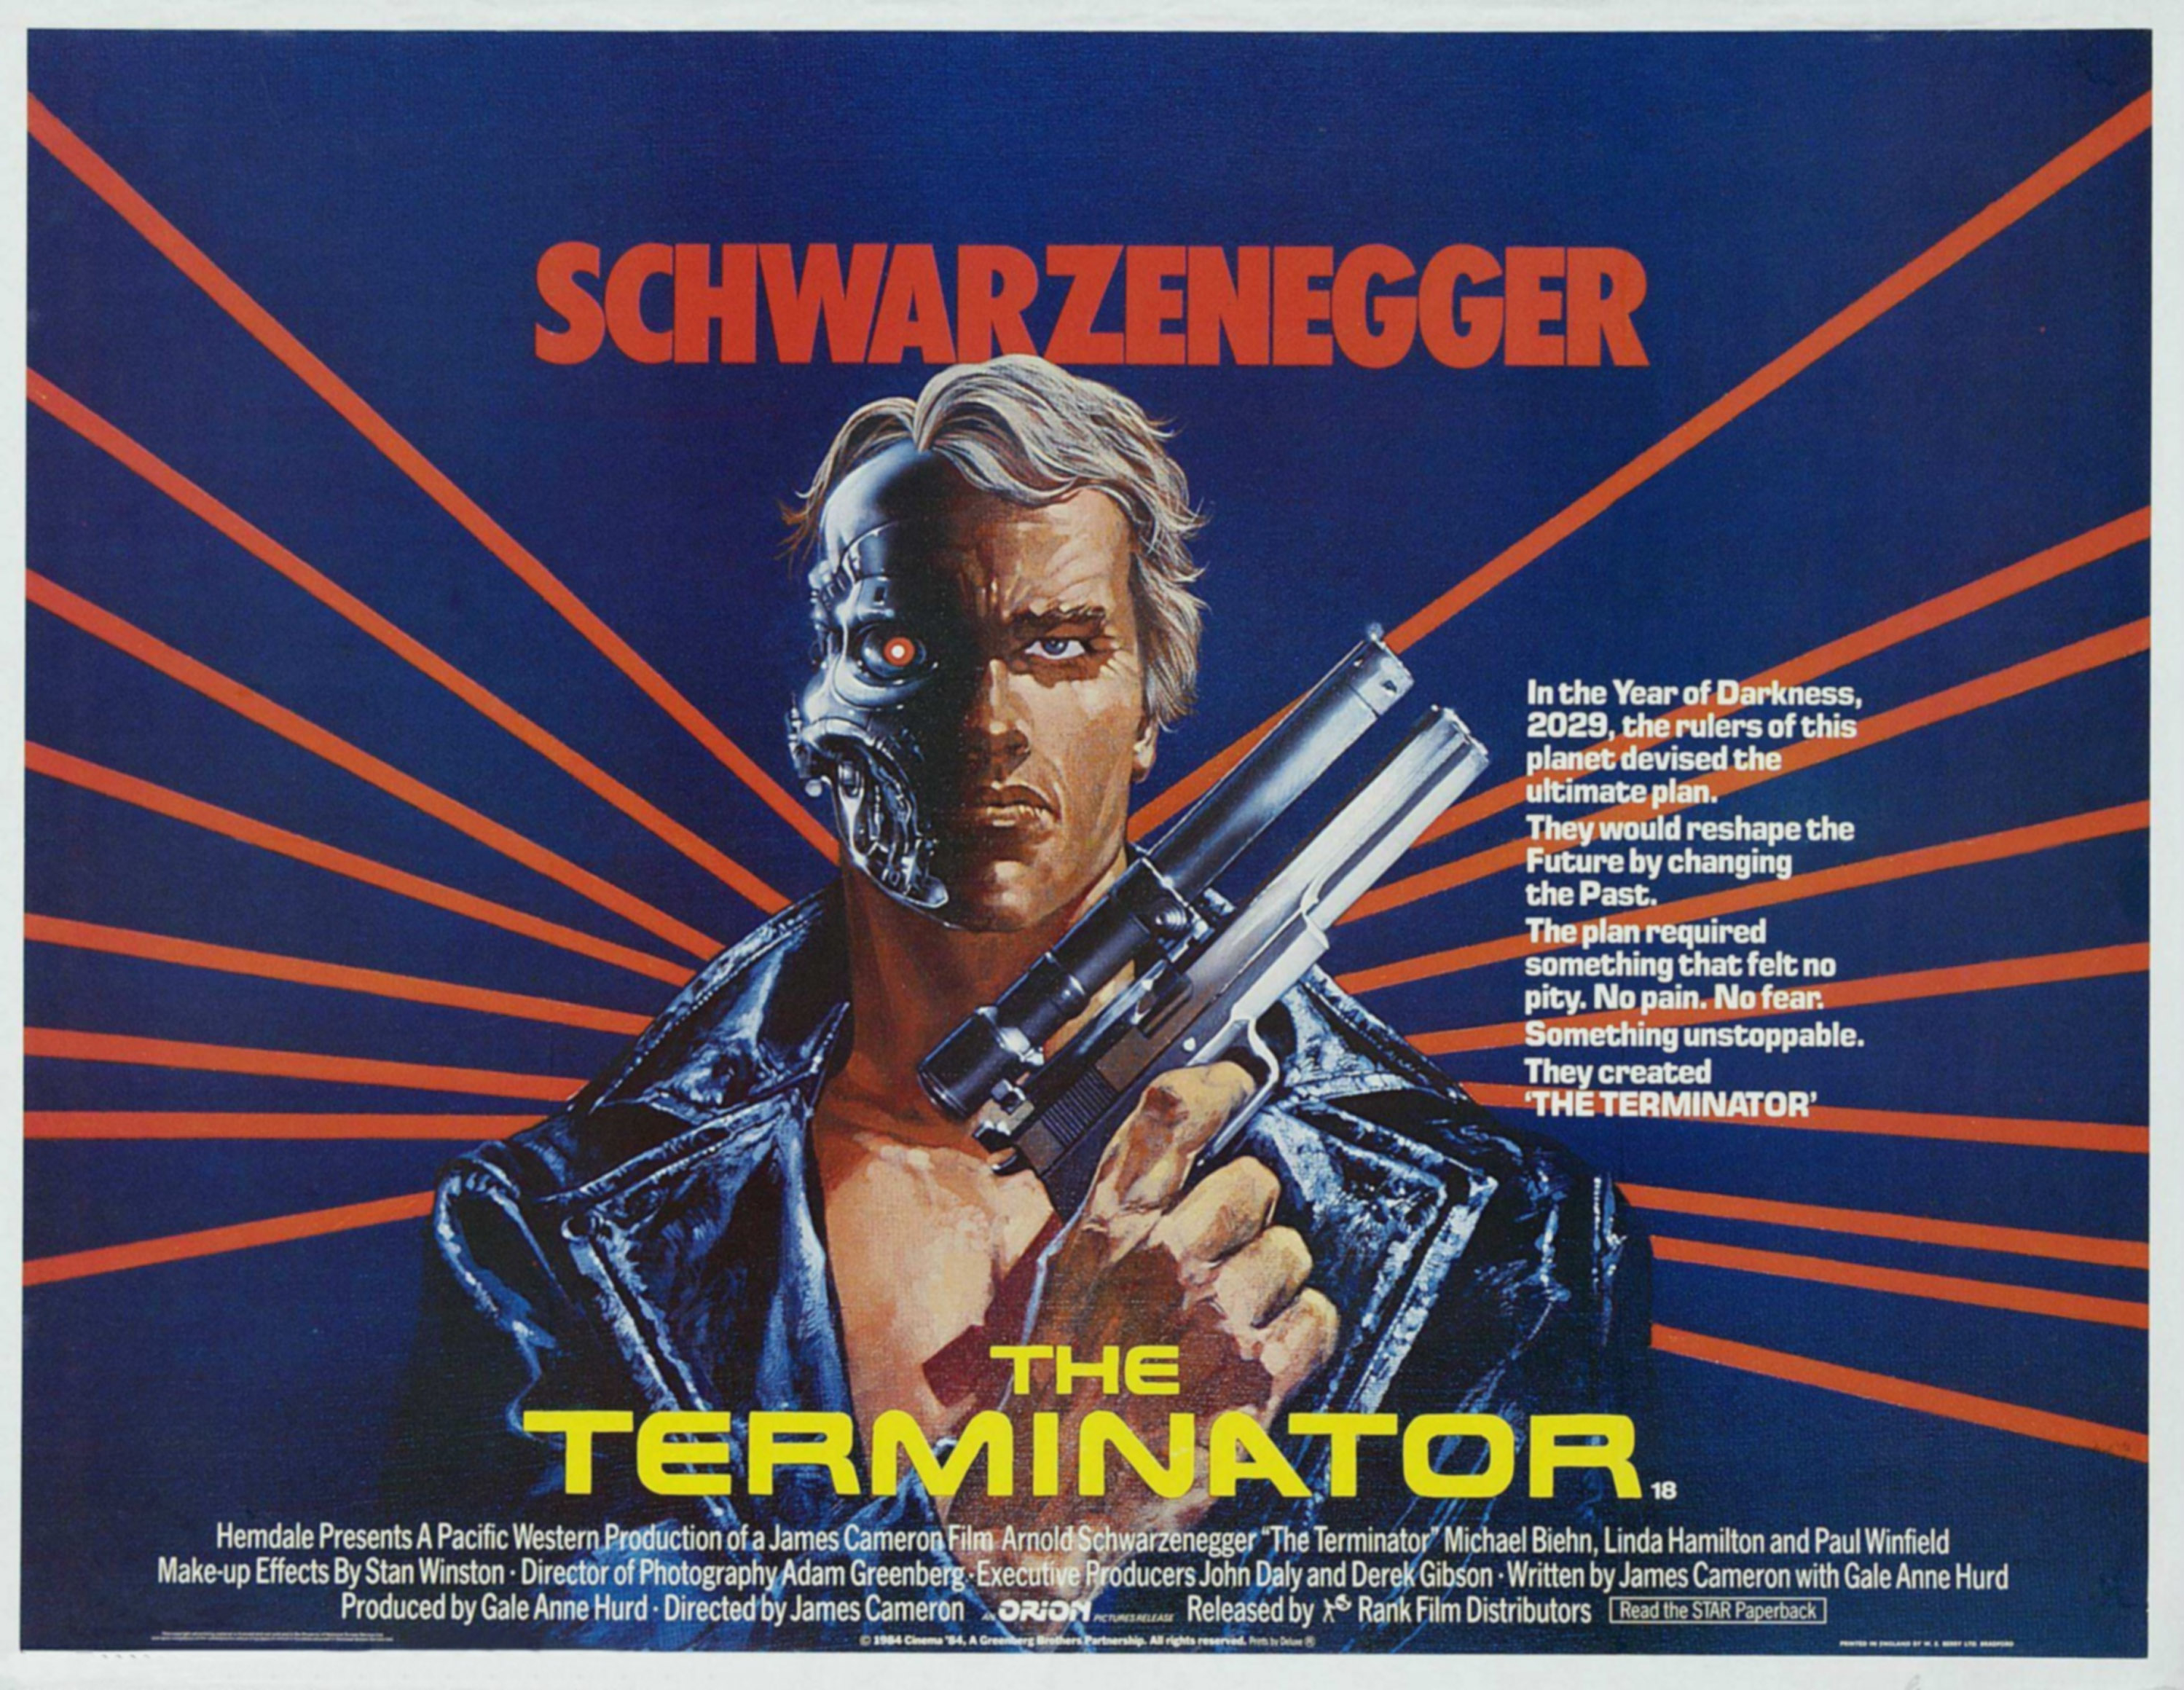 Movie poster of &quot;The Terminator&quot; featuring a character holding a gun, with futuristic text and graphics